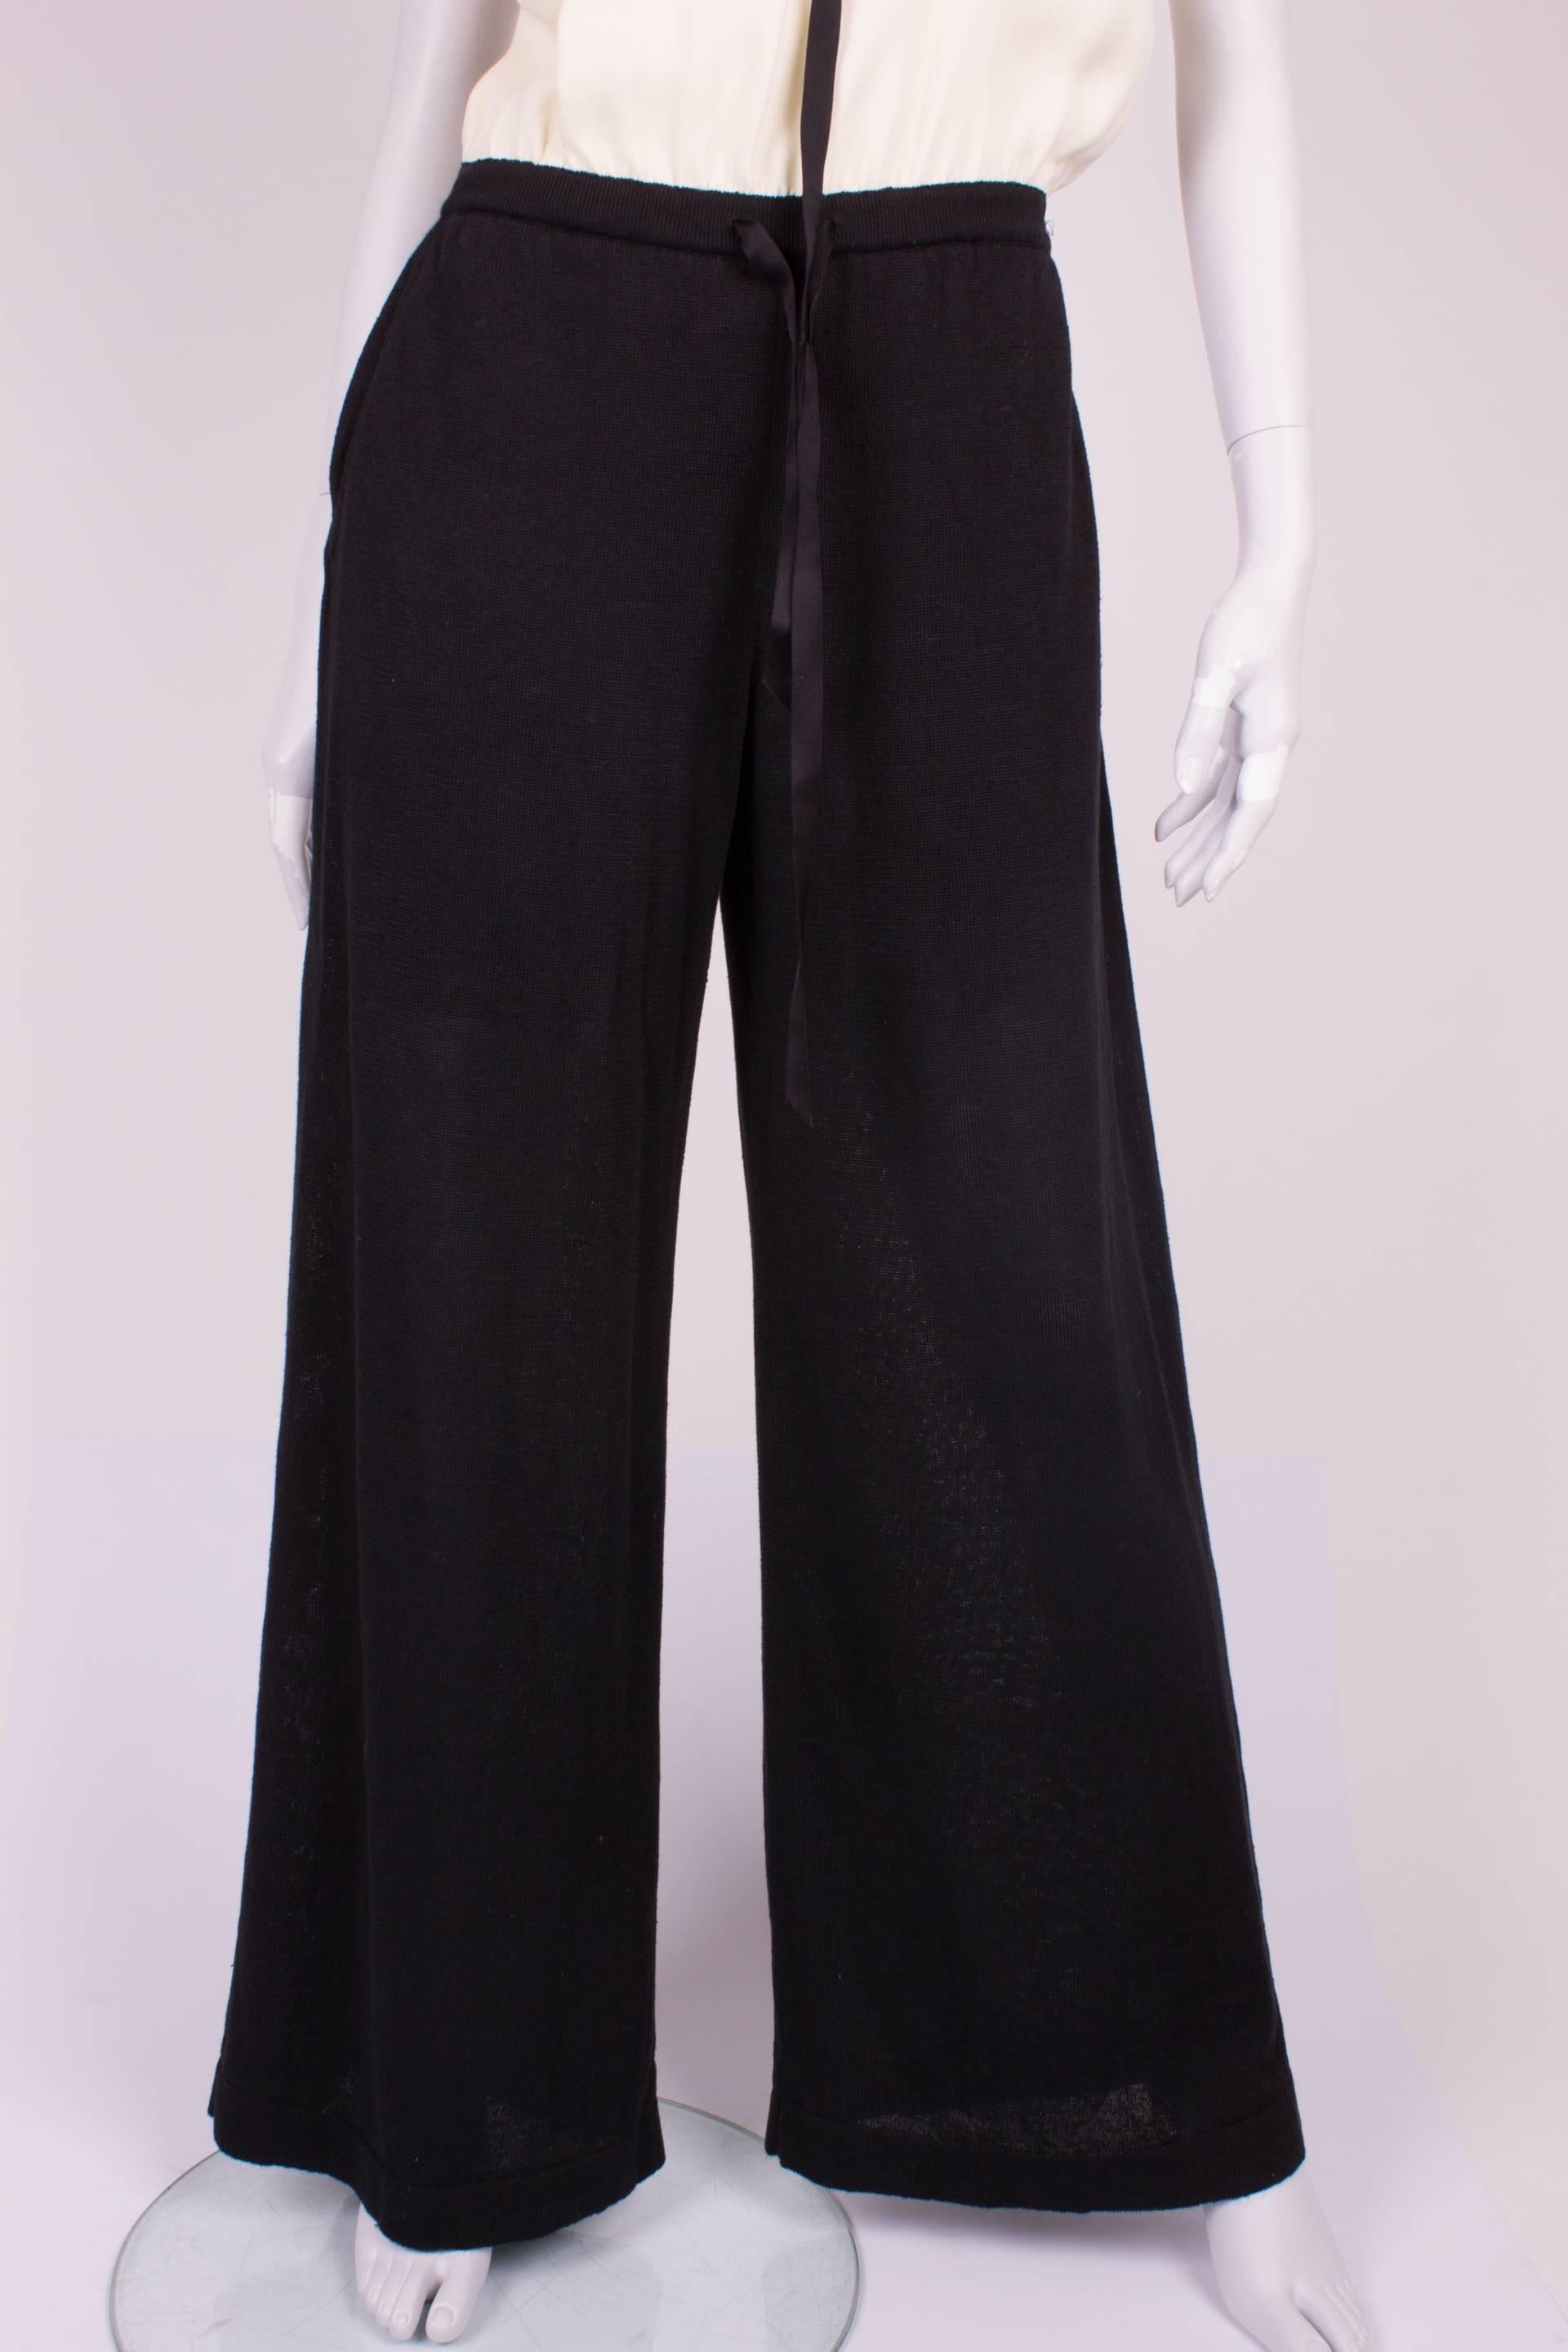 Stylish jump suit by Chanel in black and white.

The upper part is made of silk and fully lined. In the hem on top some elastic is added, the jump suit will not come down. A black bow on top and also one in the waist.

The supple pants are made of